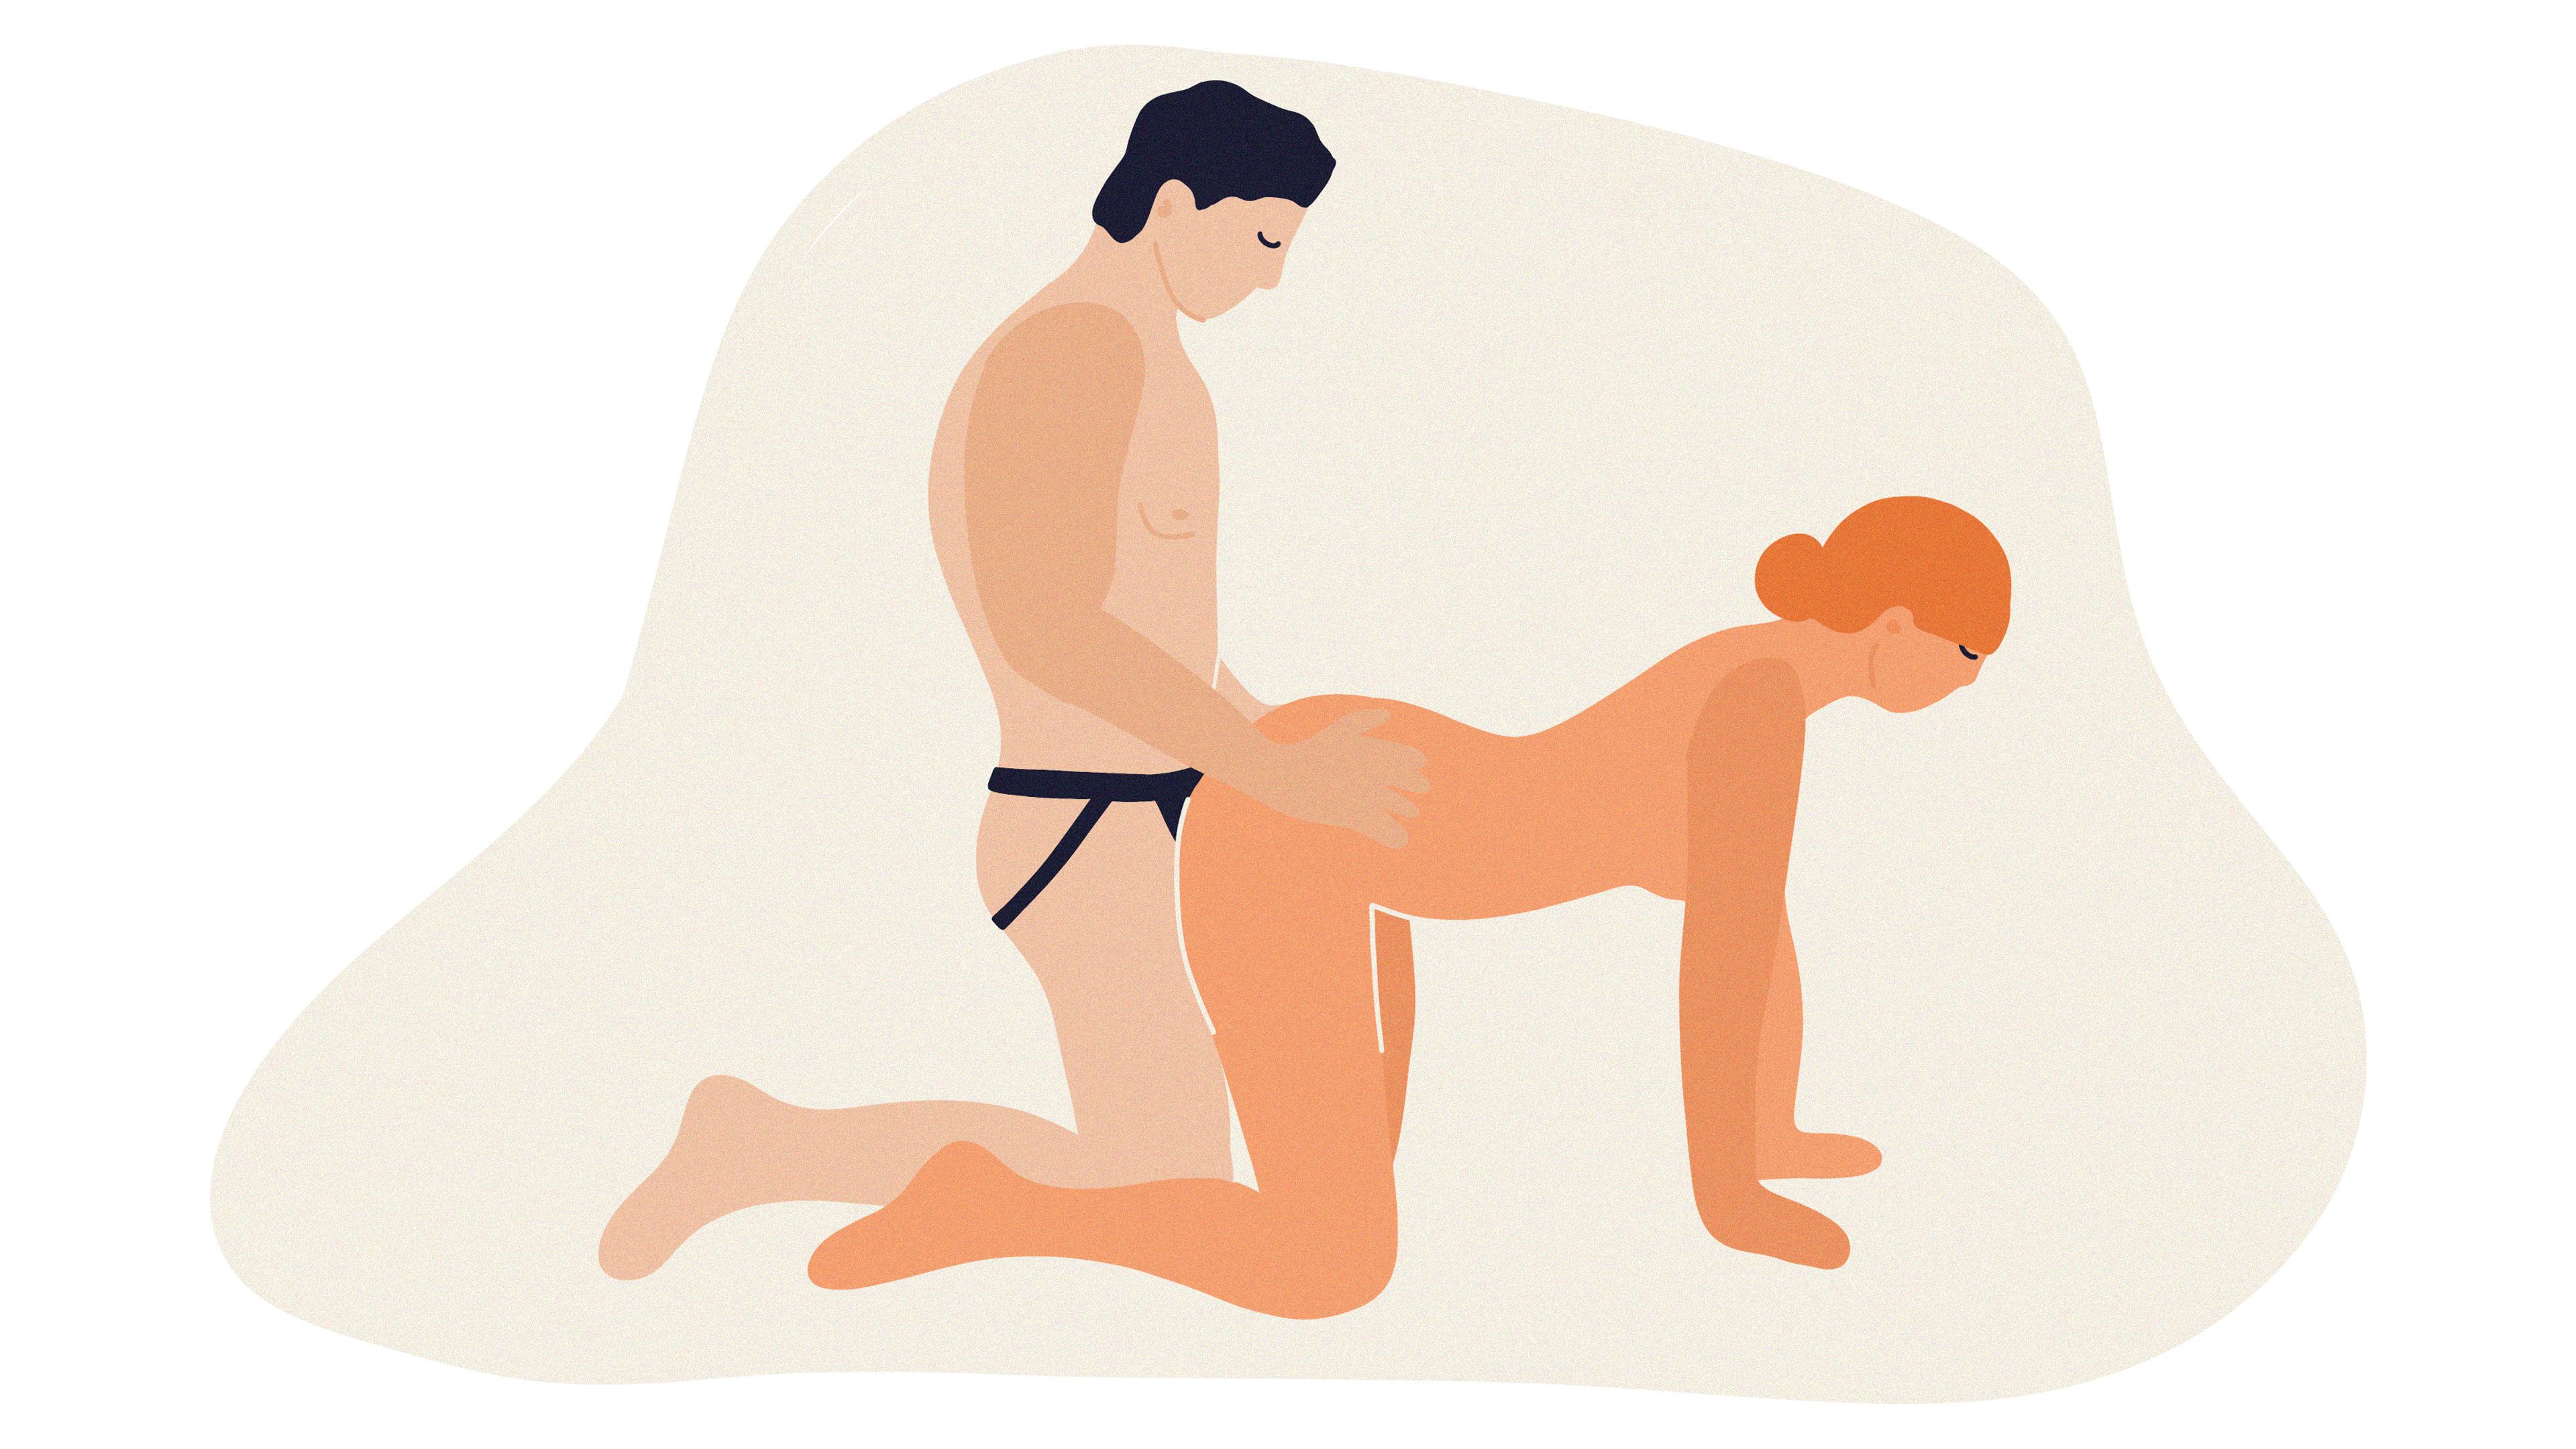 Sex Positions For Small Dicks